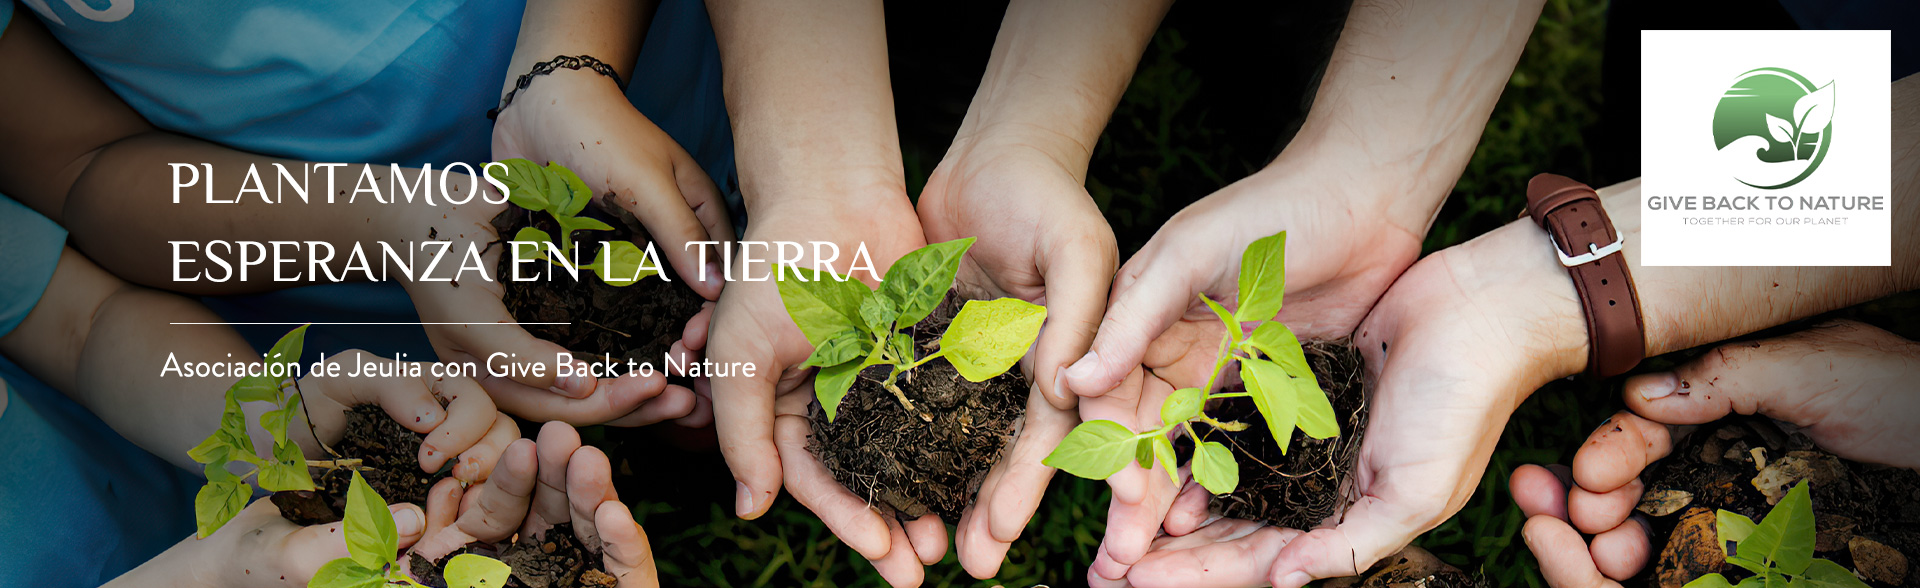 Jeulia's Partnership with Give Back to Nature